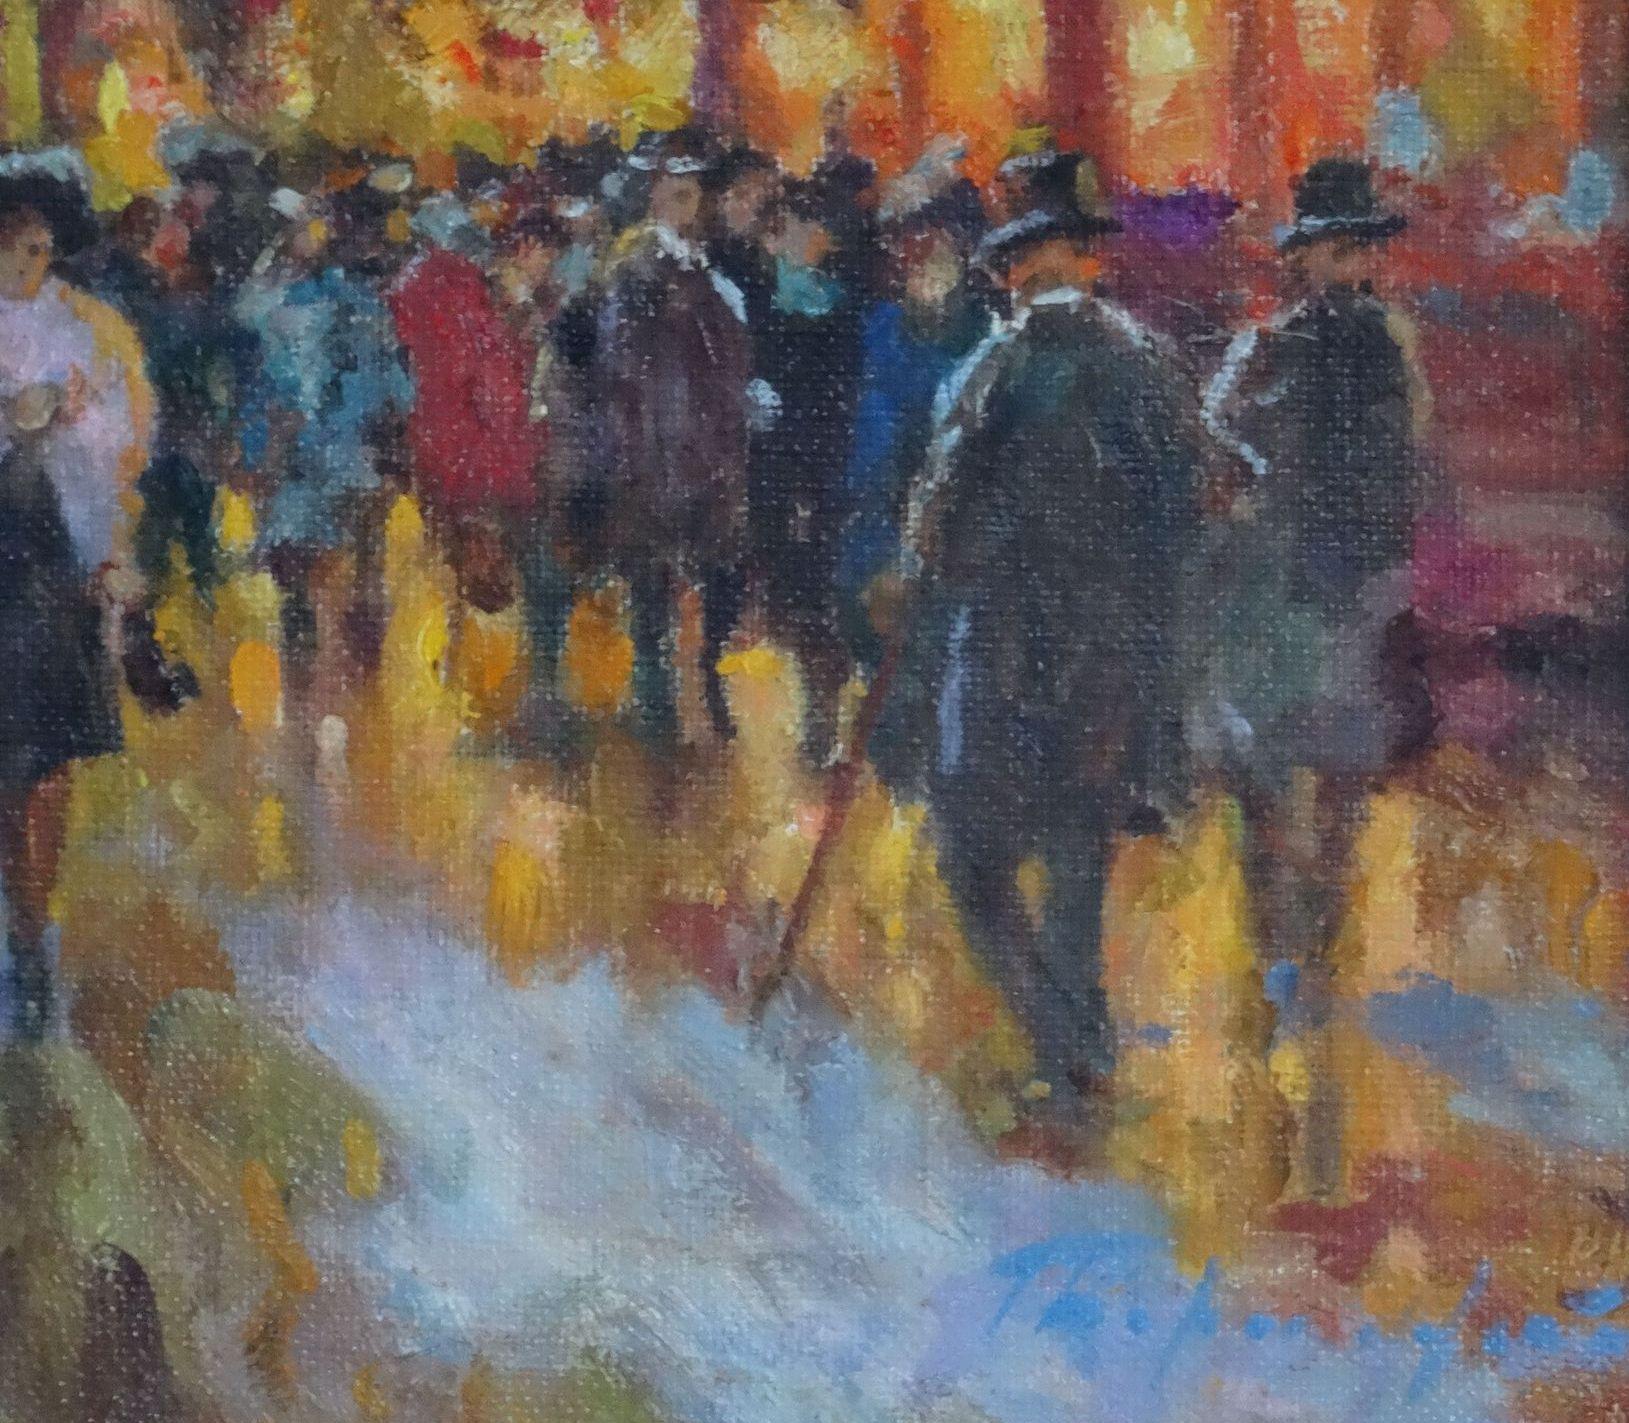 Paris before Christmas. Oil on canvas, 49, 5x65 cm - Painting by Gennady Bernadsky 